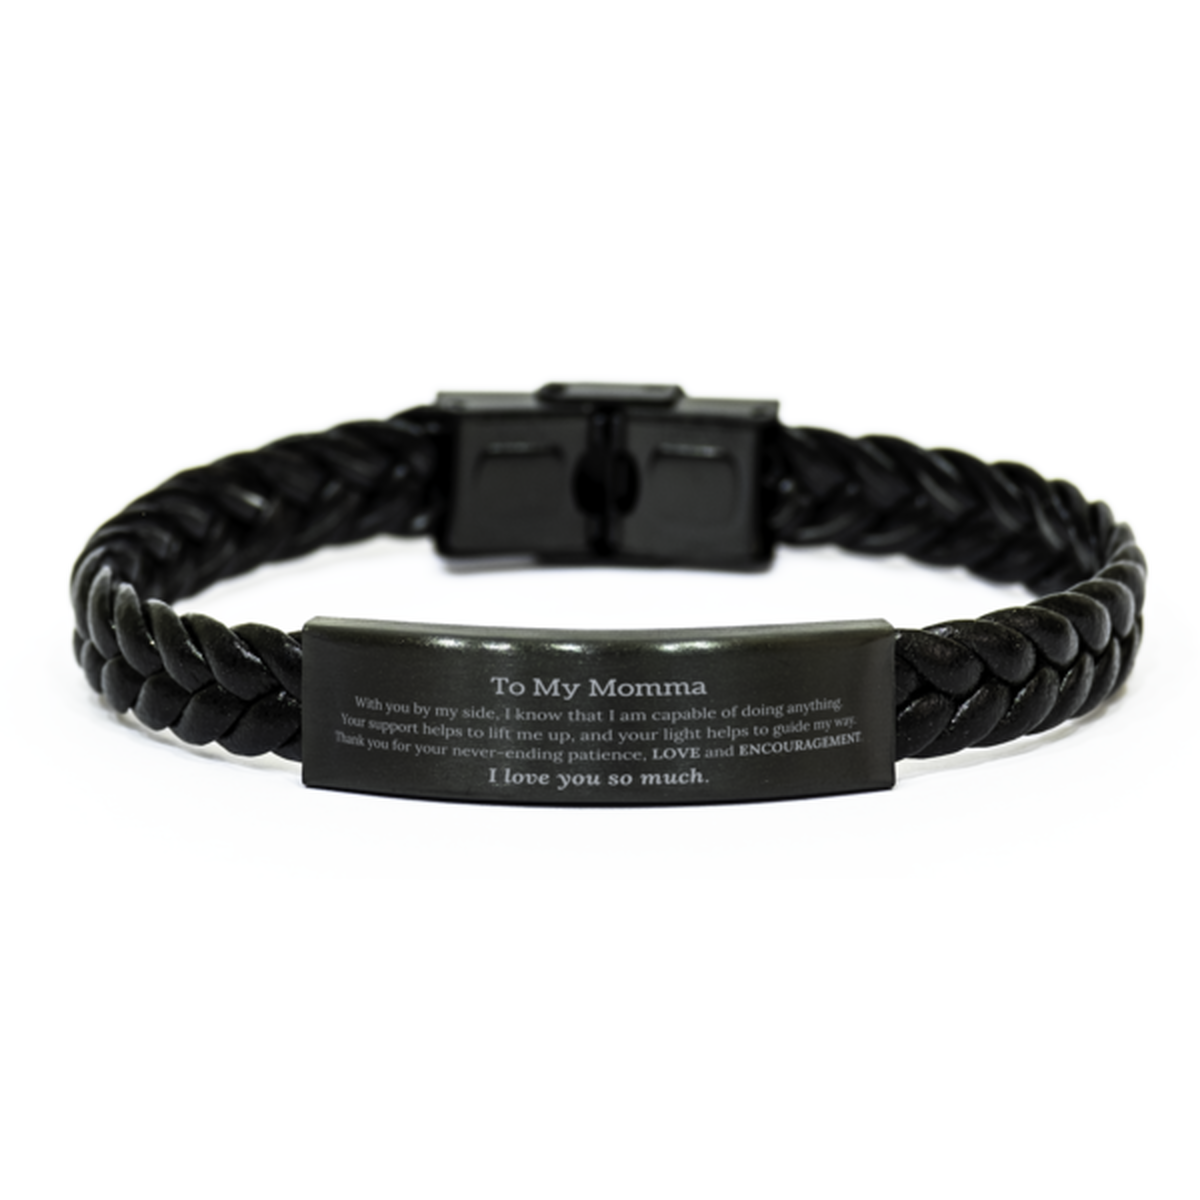 Appreciation Momma Braided Leather Bracelet Gifts, To My Momma Birthday Christmas Wedding Keepsake Gifts for Momma With you by my side, I know that I am capable of doing anything. I love you so much